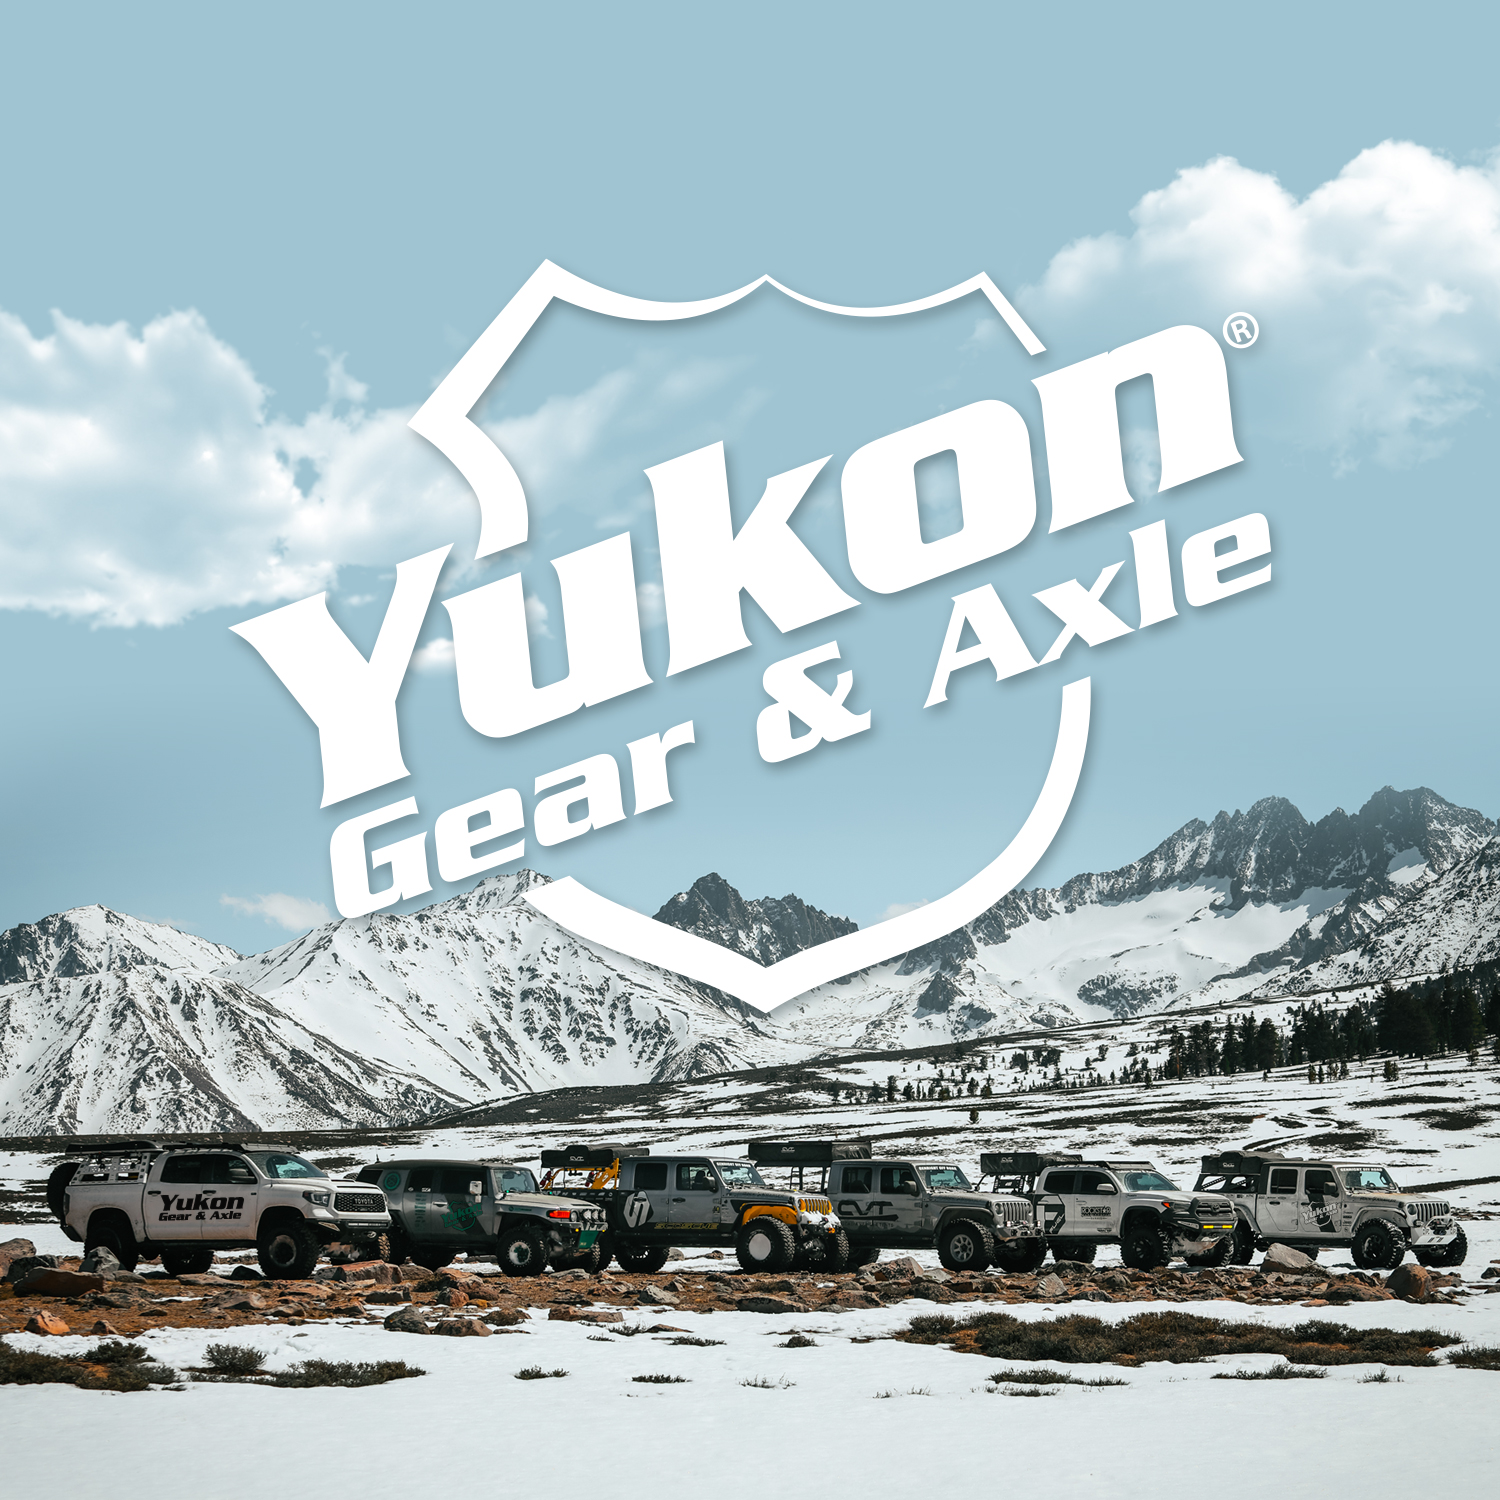 Yukon replacement outer stub axle for Dana 60 with ABS tone ring 